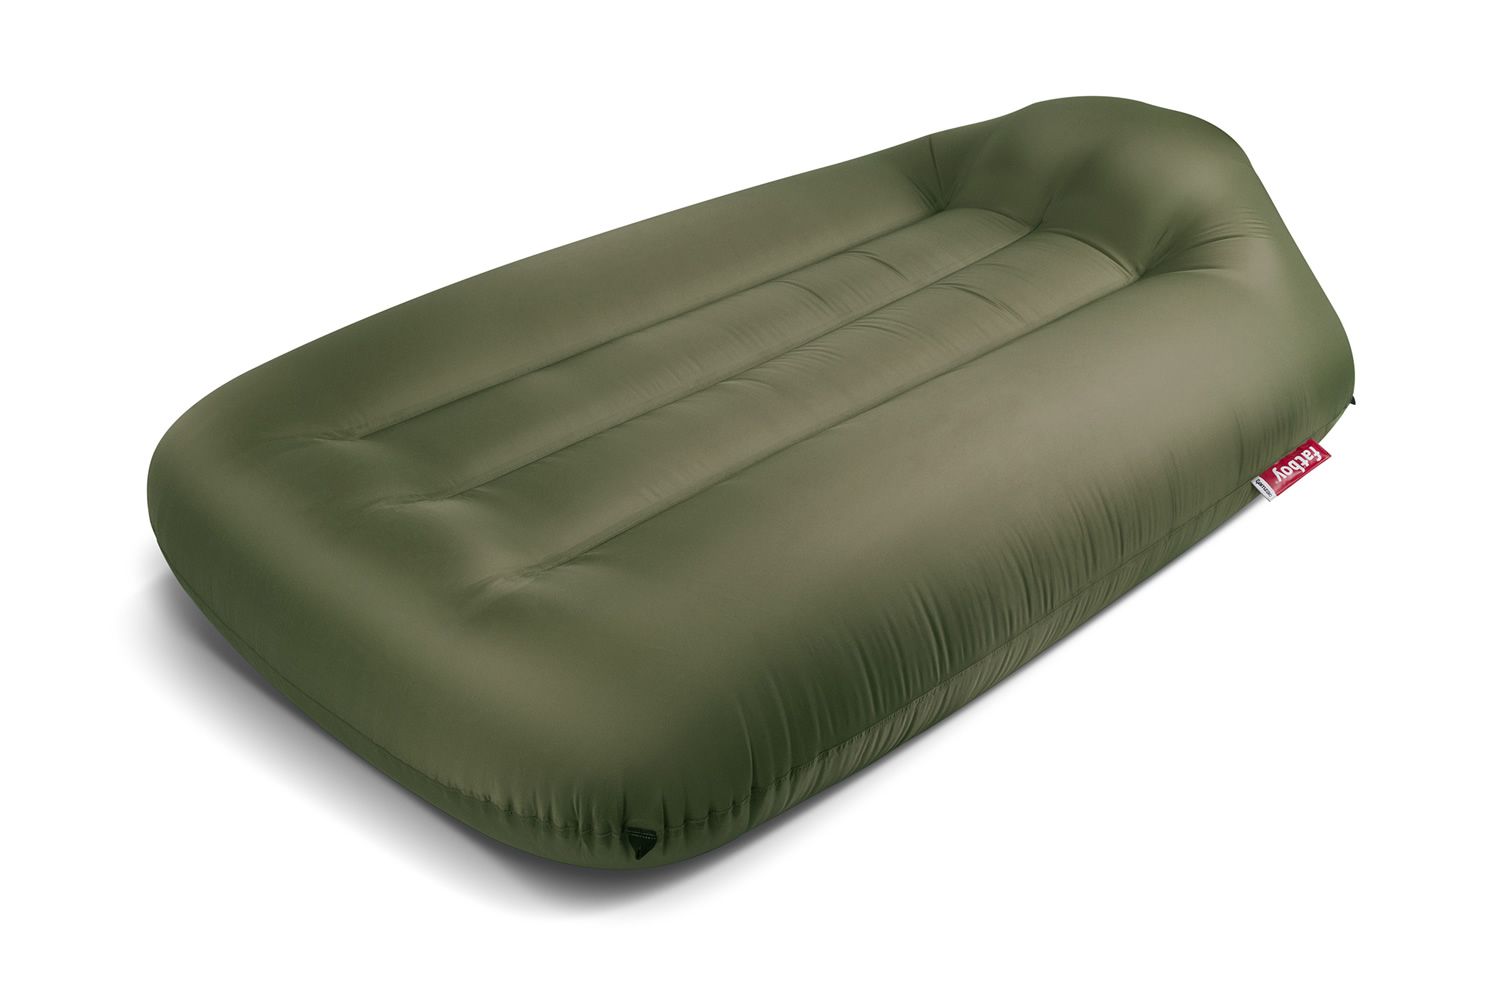 Fatboy Lamzac Inflatable Air Lounger Bed and Carry Case